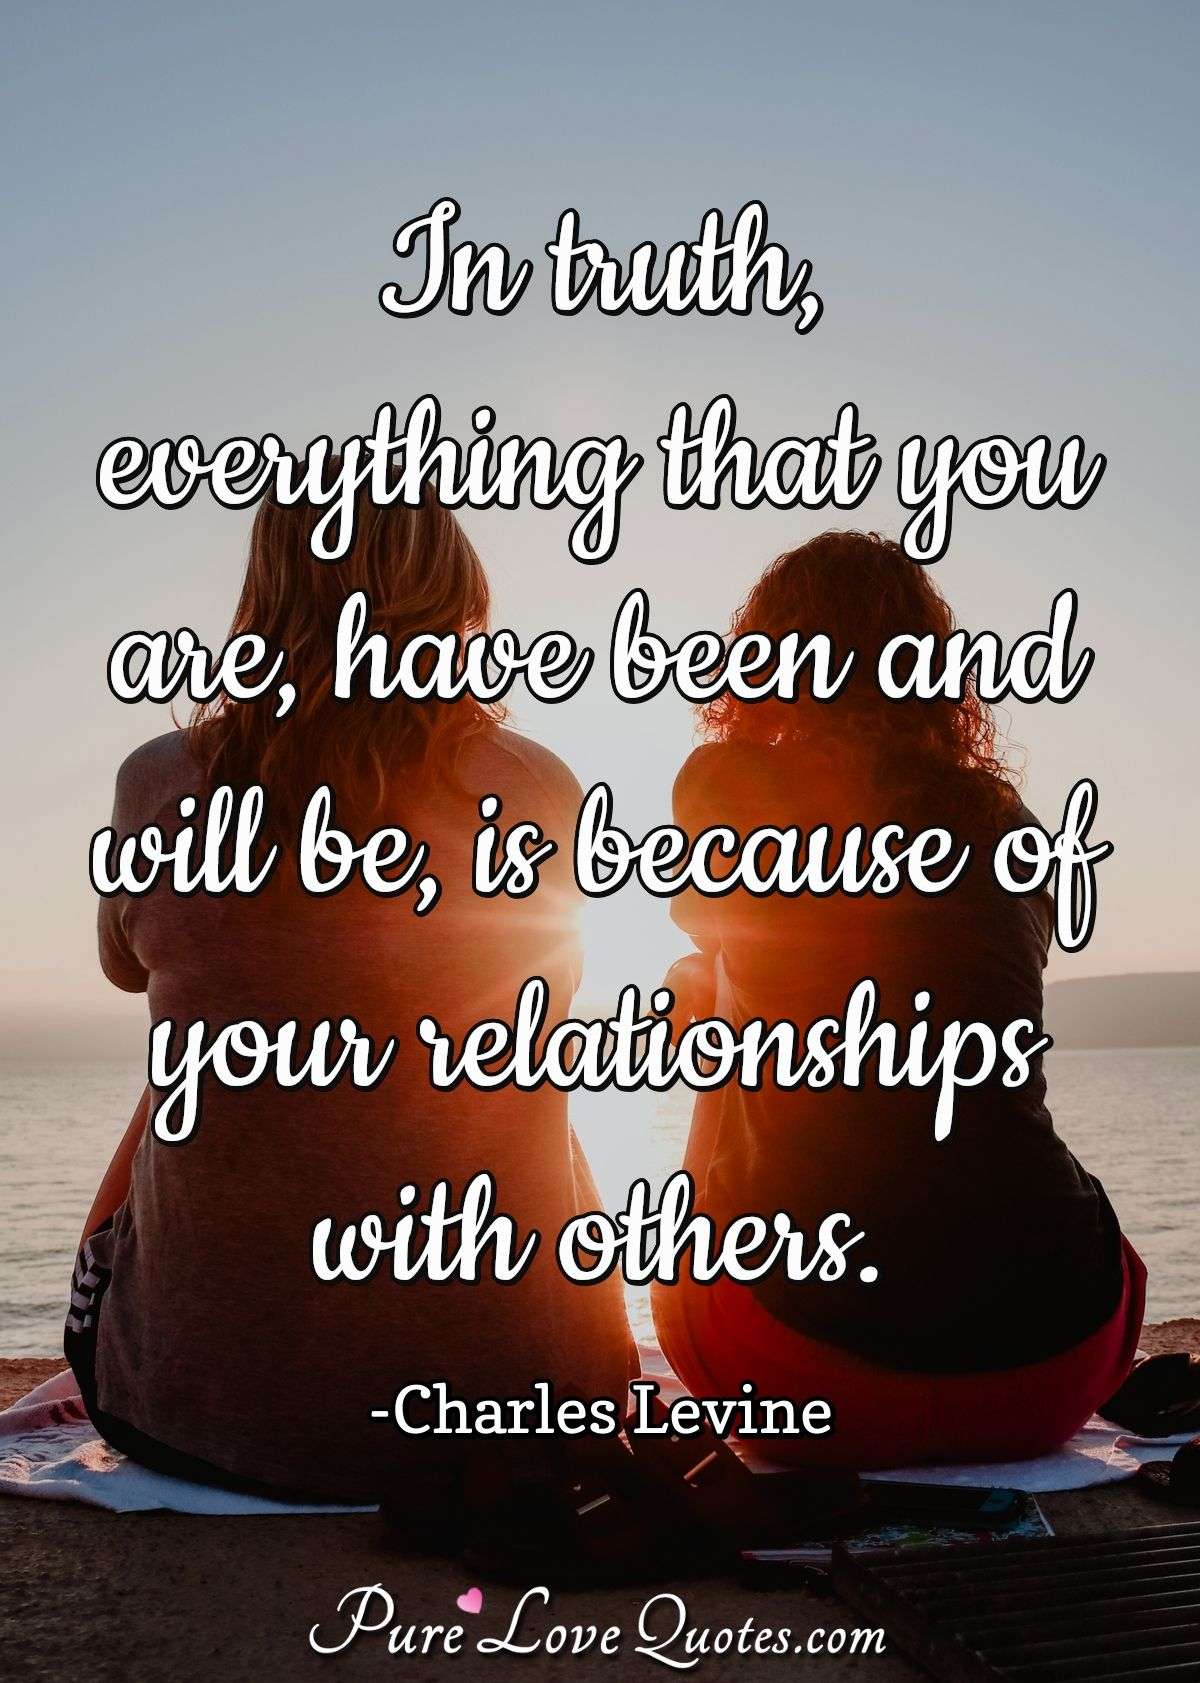 In truth, everything that you are, have been and will be, is because of your relationships with others. - Charles Levine